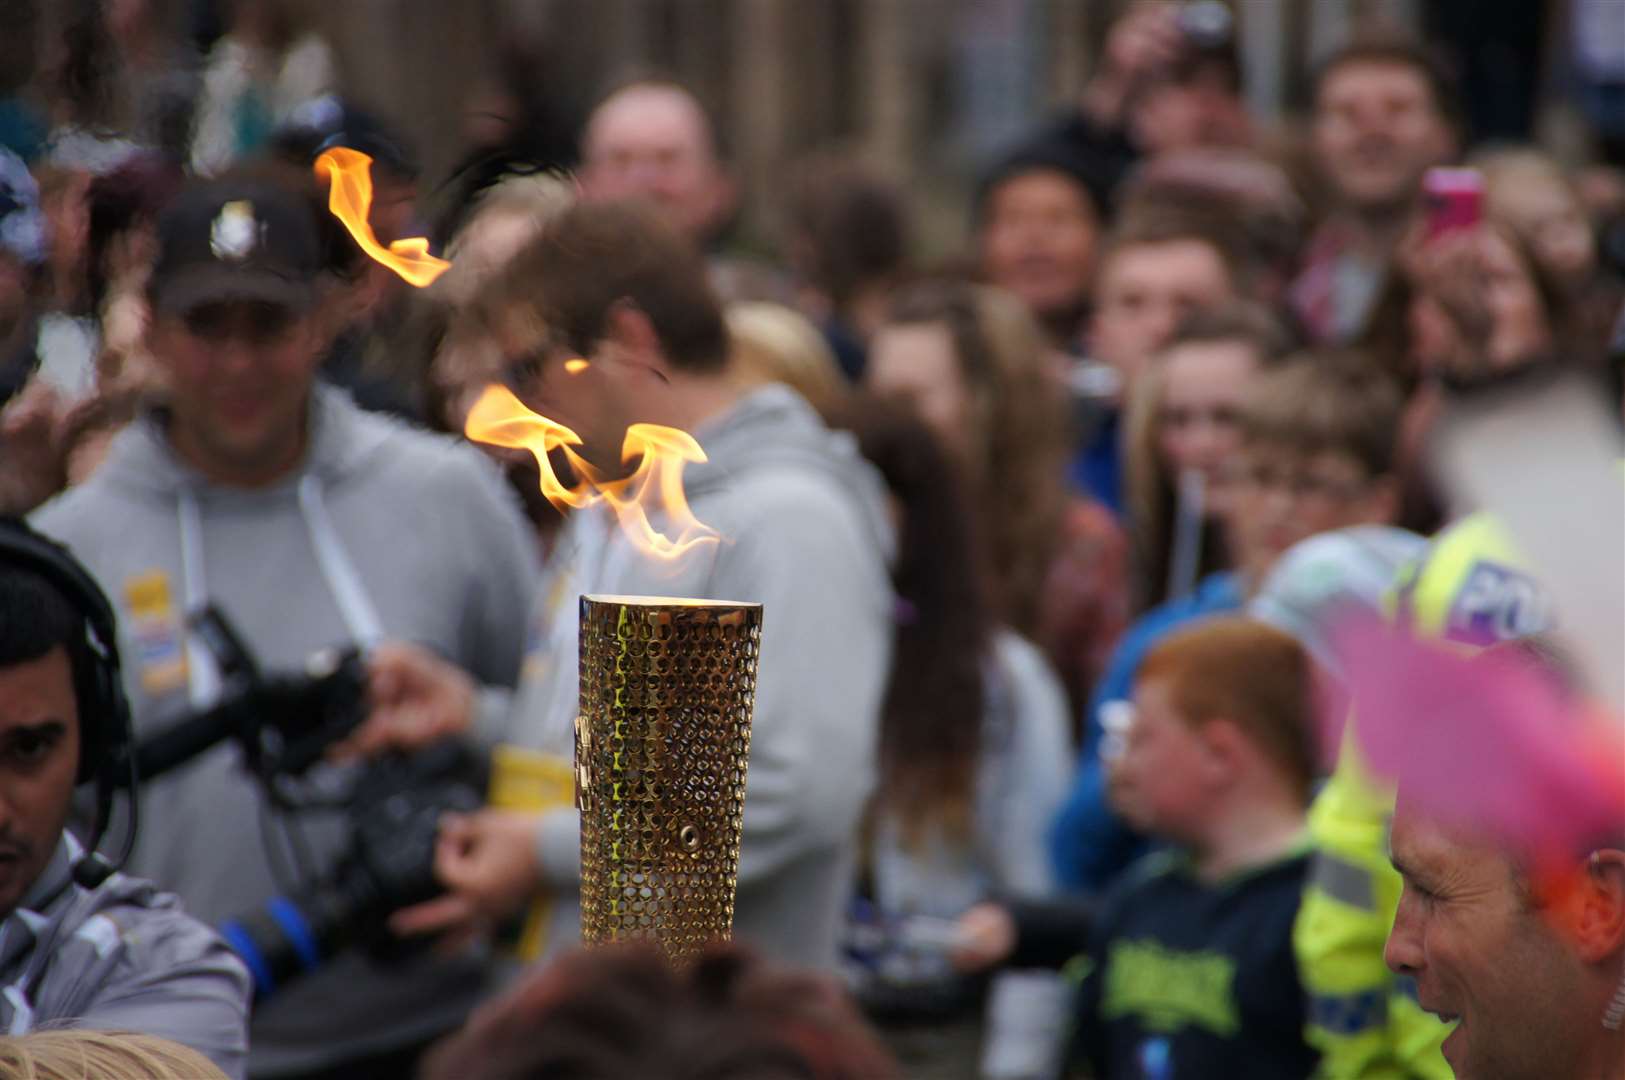 The Olympic Torch passed through Inverness in June 2012 on its journey around Britain before the Games in London. Norman Smart captured its visit.